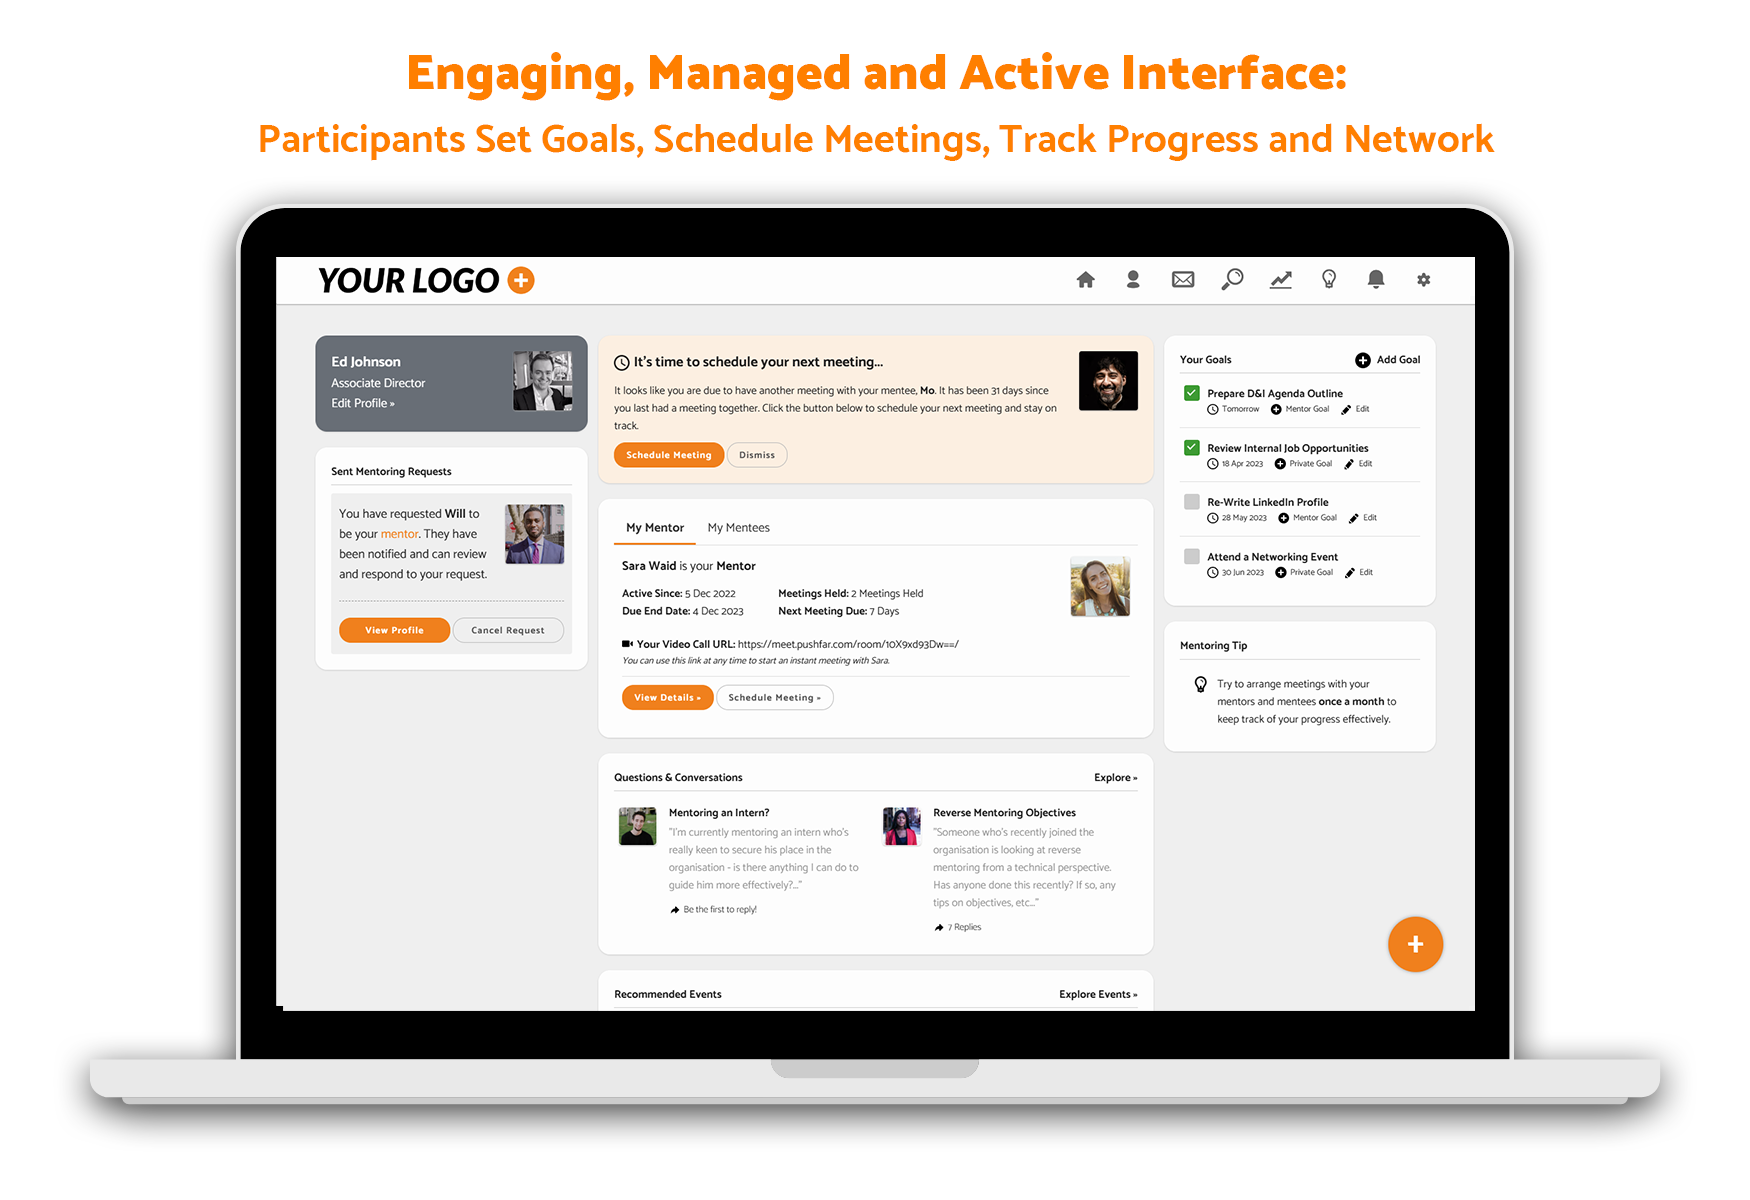 Interactive, Engaging Interface for Participants to Manage their Mentoring Relationships. Including Goal Tracking, Gamification, Feedback, Networking and Profile Pages.